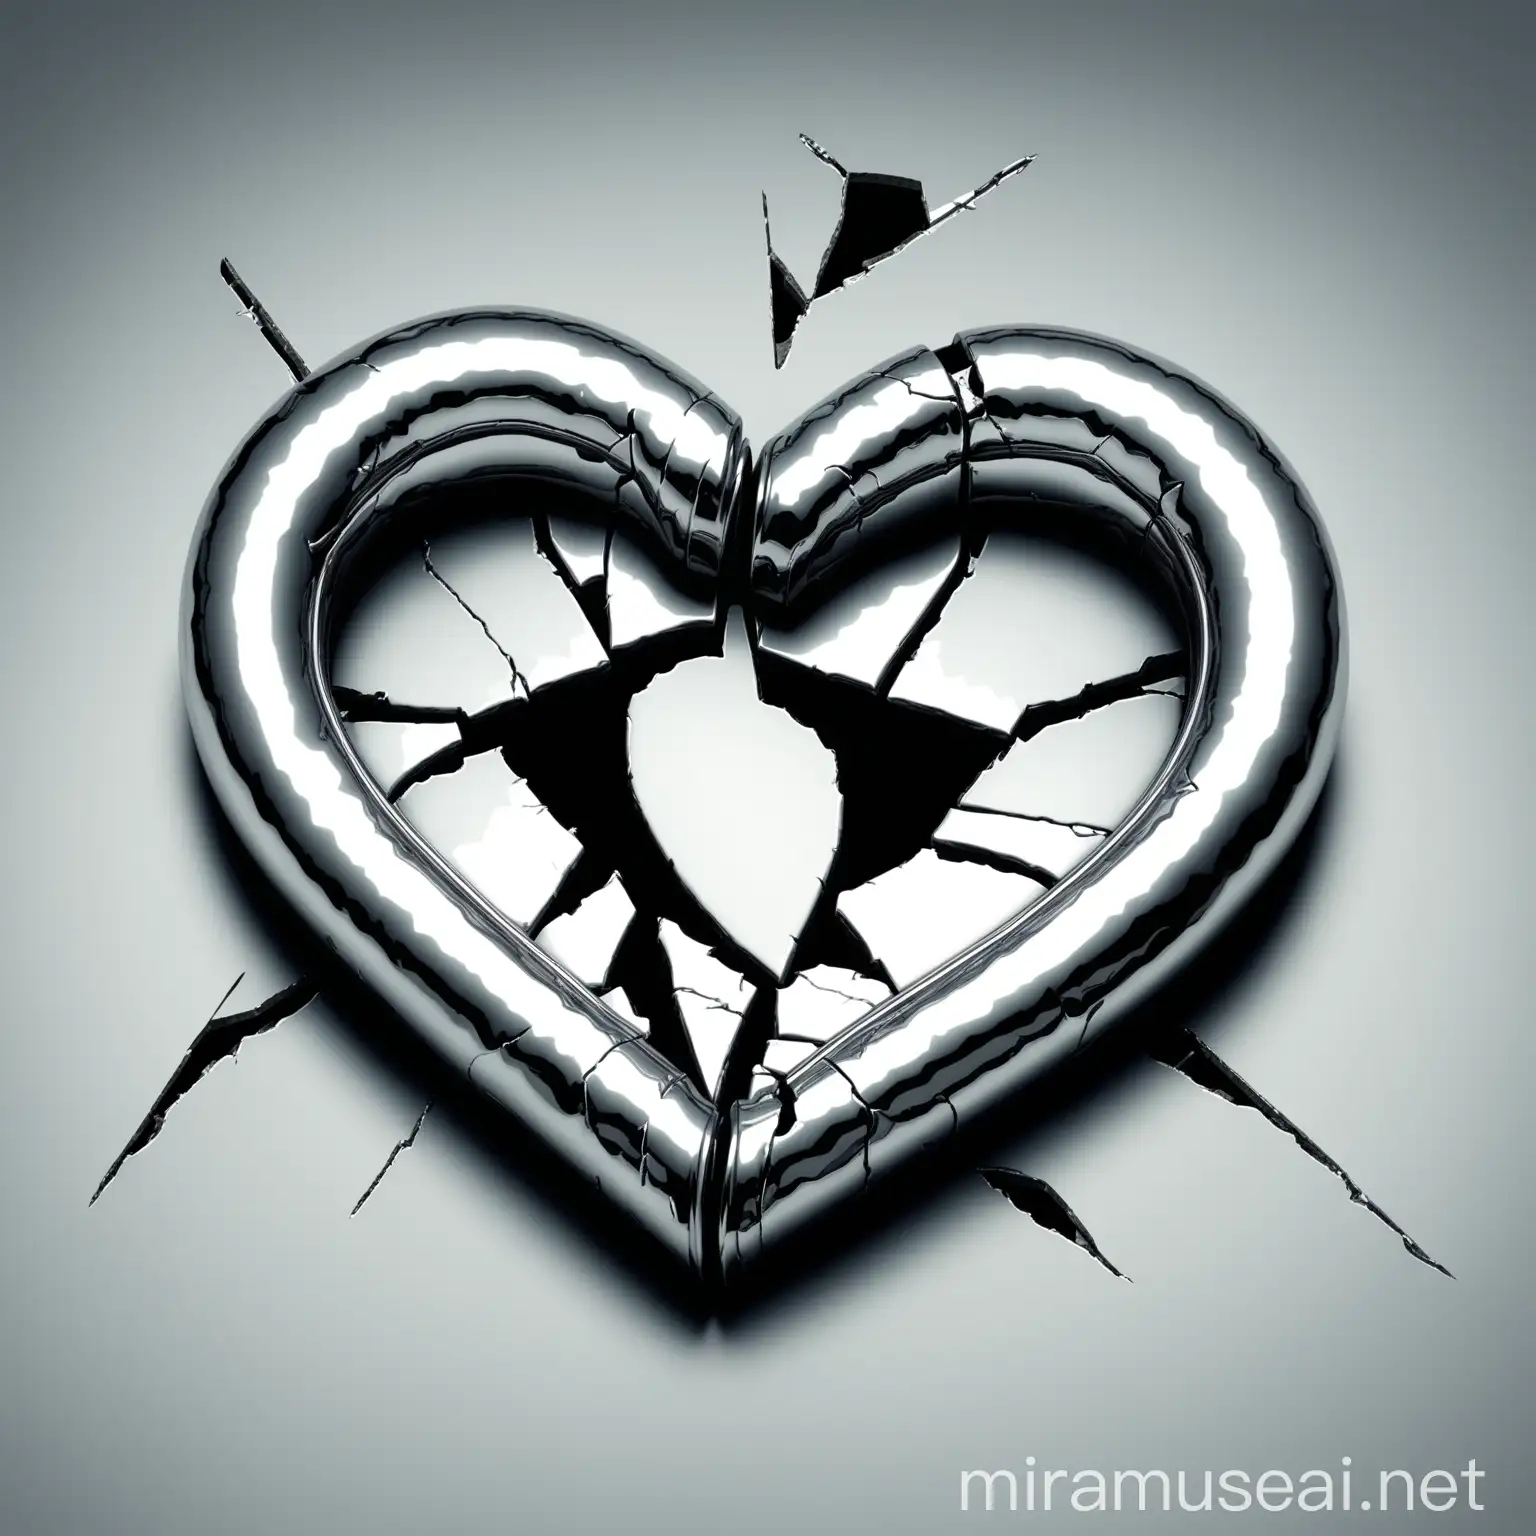 Shattered Chrome Heart in Abstract Artistic Composition